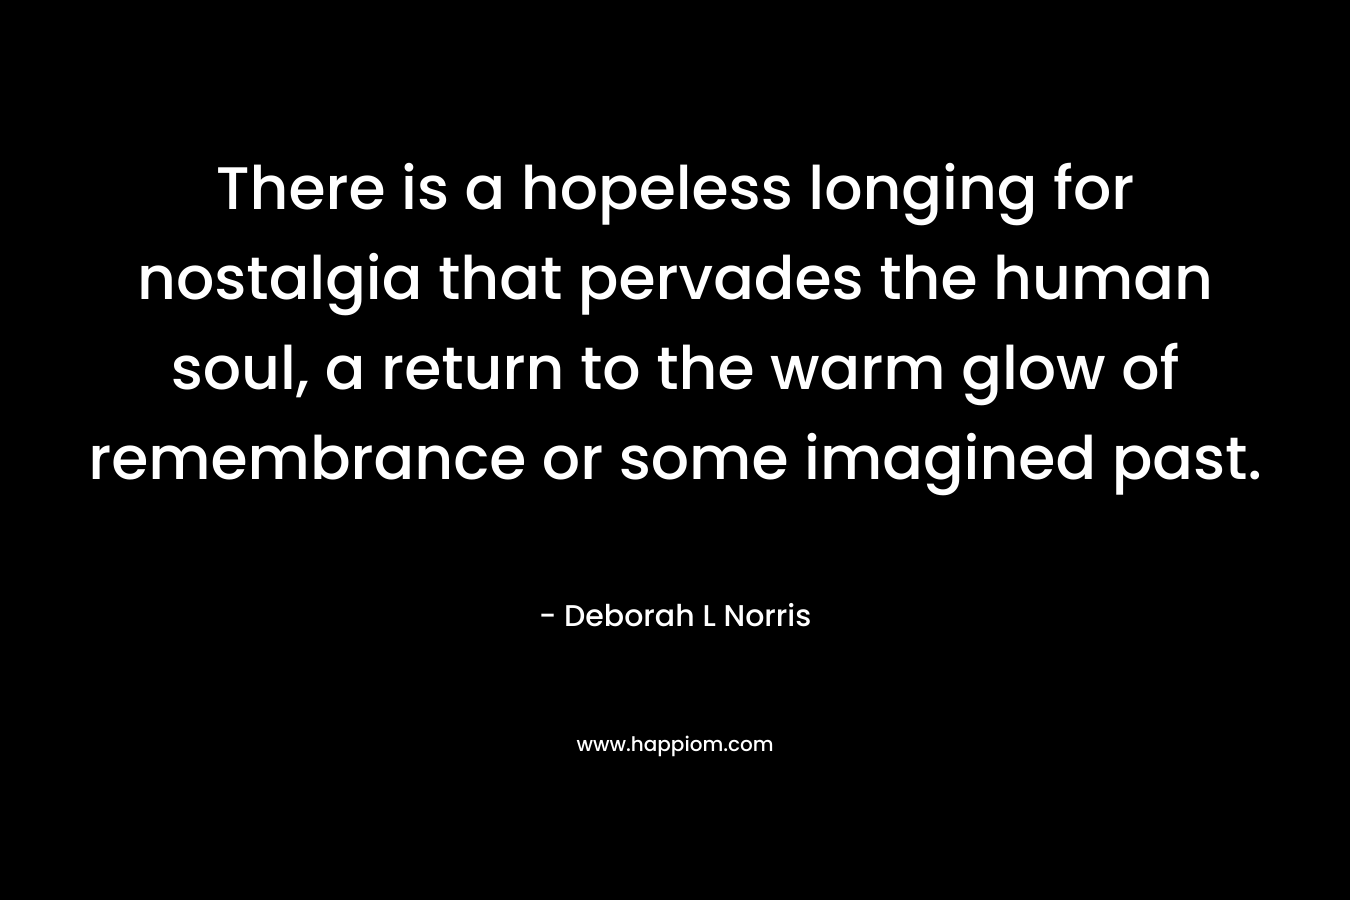 There is a hopeless longing for nostalgia that pervades the human soul, a return to the warm glow of remembrance or some imagined past. – Deborah L Norris